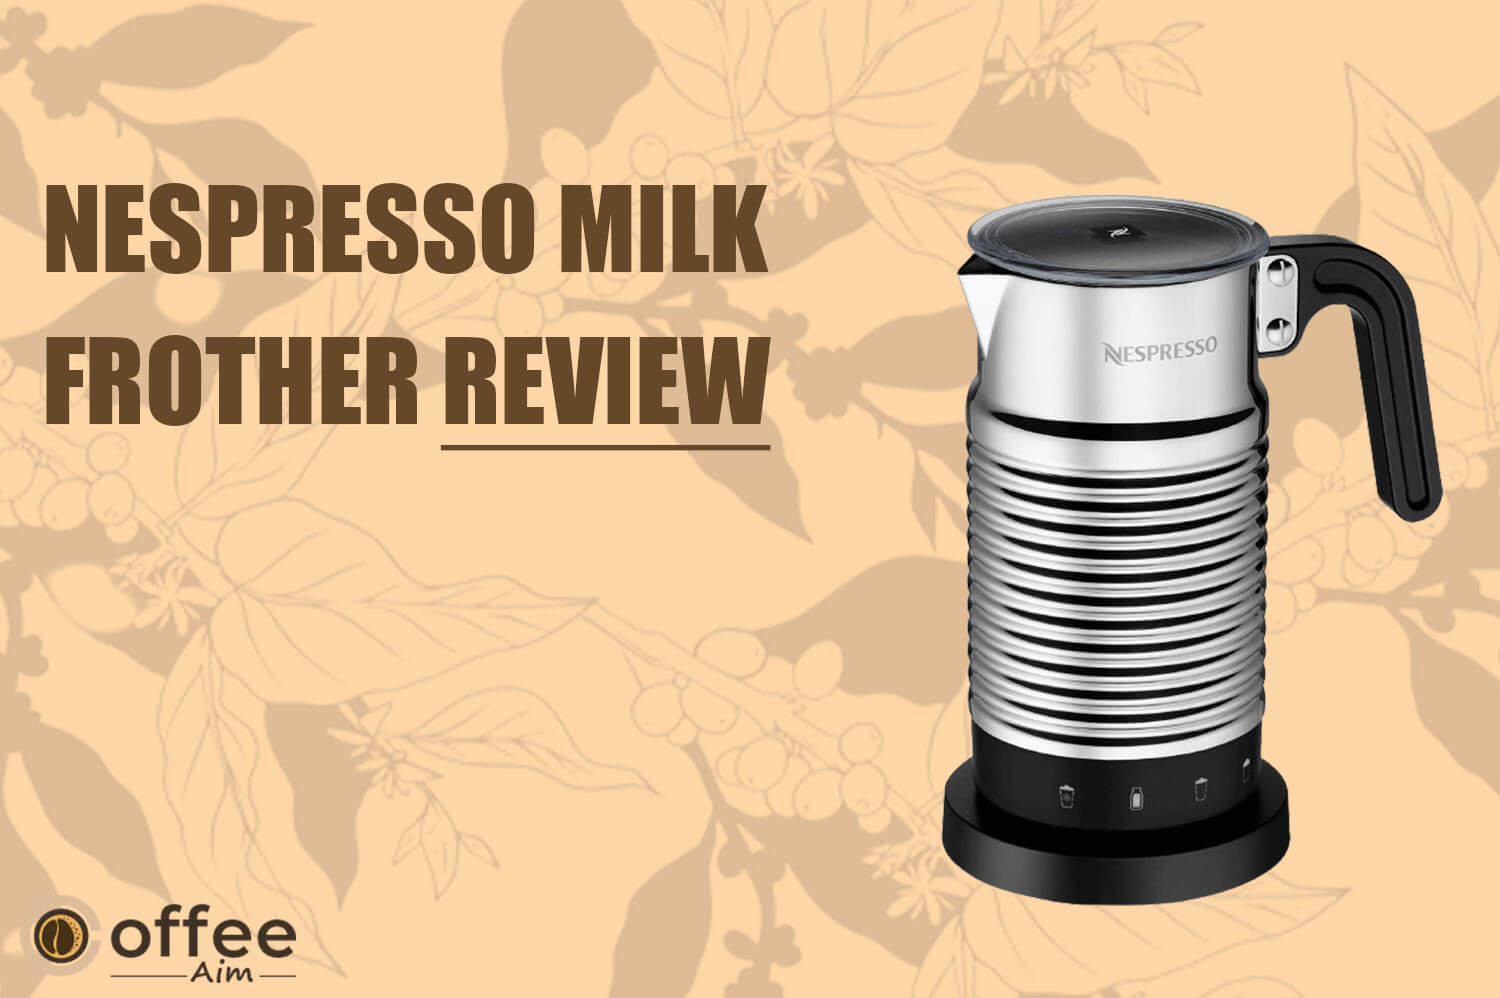 https://coffeeaim.com/wp-content/uploads/2022/07/Nespresso-Milk-Frother-Review.jpg?ezimgfmt=ng%3Awebp%2Fngcb1%2Frs%3Adevice%2Frscb1-2